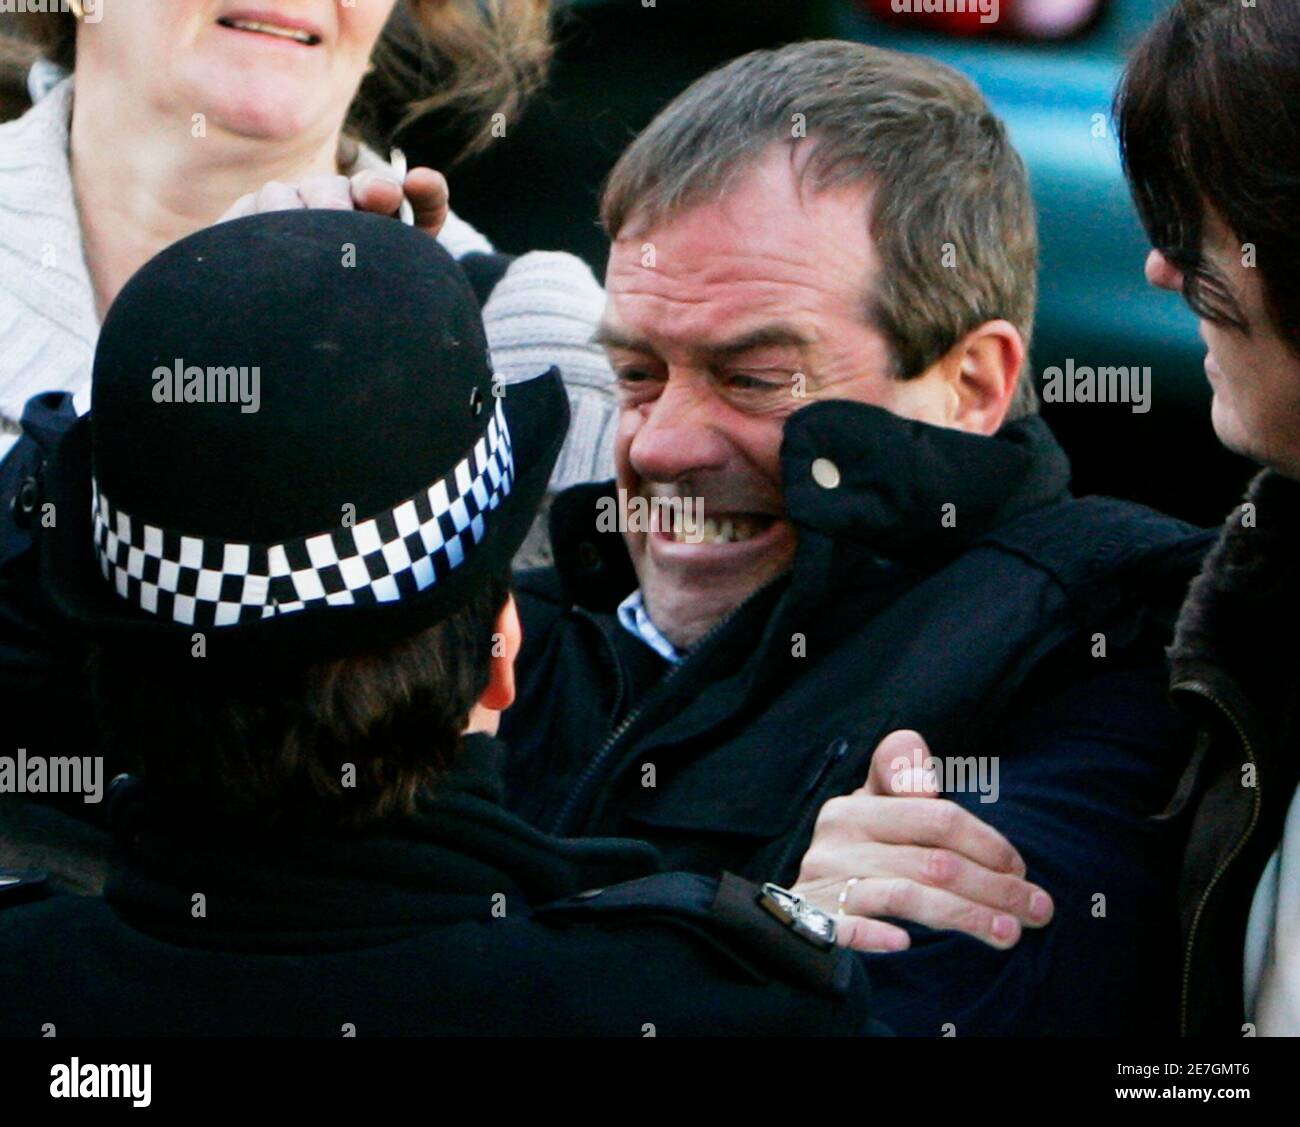 Michael Hamilton, the father of missing girl Vicky Hamilton, is restrained by friends and a police officer after he tried to attack the prison van carrying Peter Tobin, who is accused of killing Vicky, outside Linlithgow Sherriff Court, central Scotland November 15, 2007.  Tobin appeared in court on Thursday charged with murdering the teenage girl whose remains were found in a house in Kent, 16 years after she vanished from her home.      REUTERS/David Moir (BRITAIN) Stock Photo